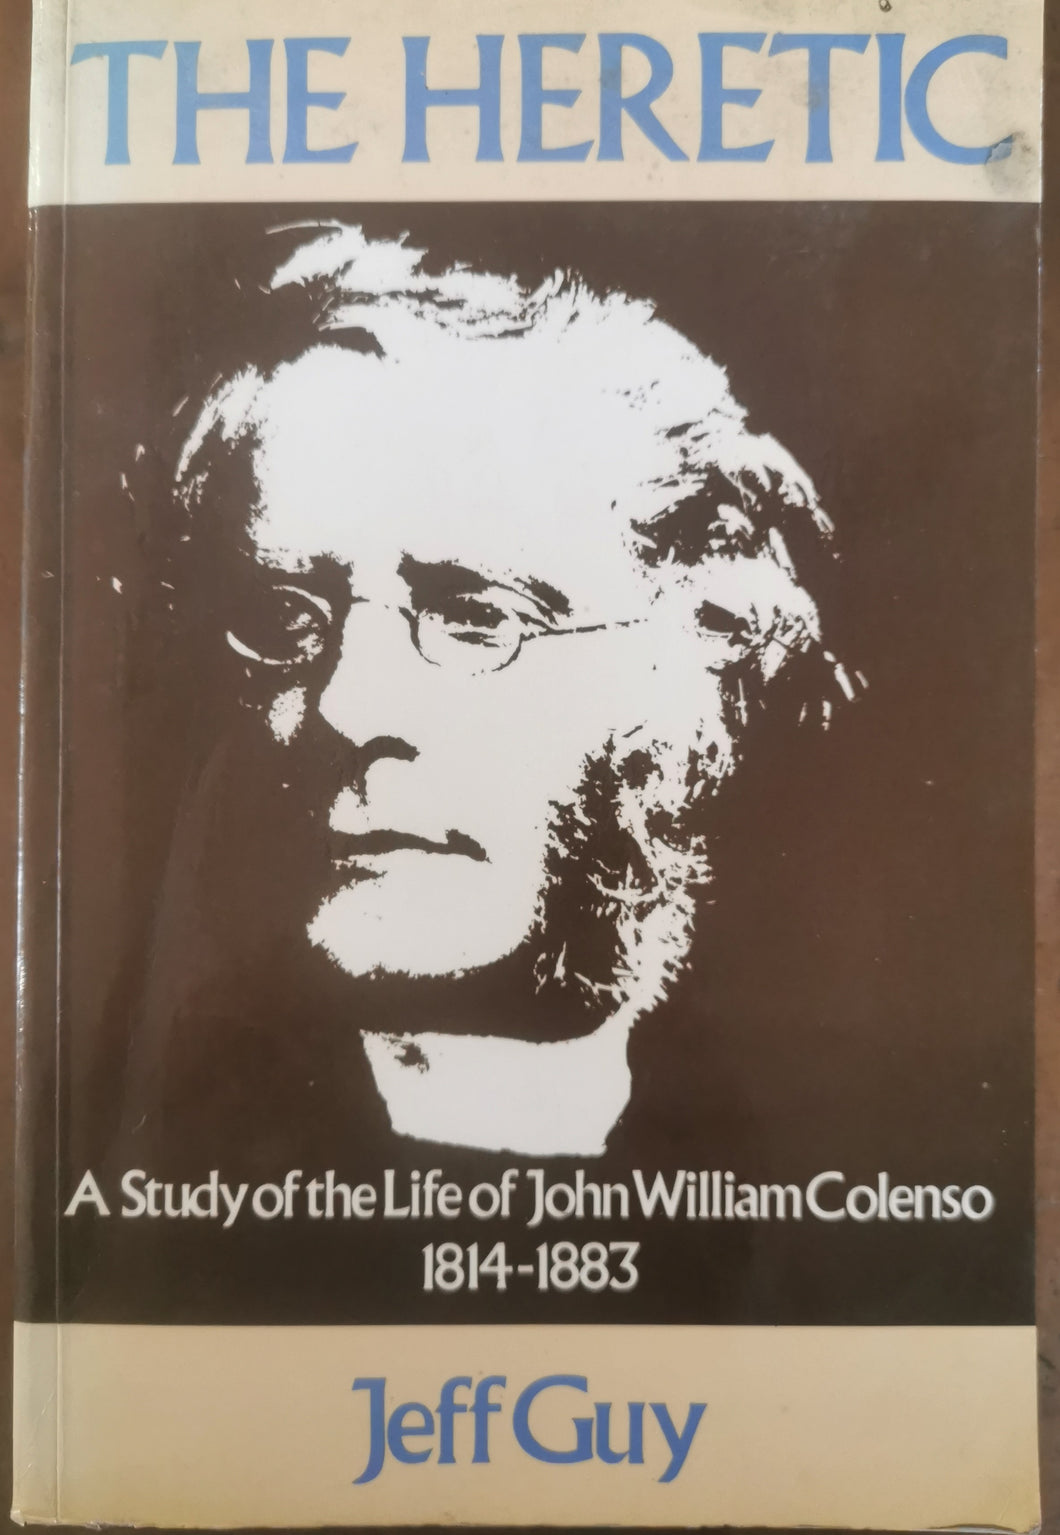 The Heretic: A Study of the Life of John William Colenso 1814-1883 by Jeff Guy